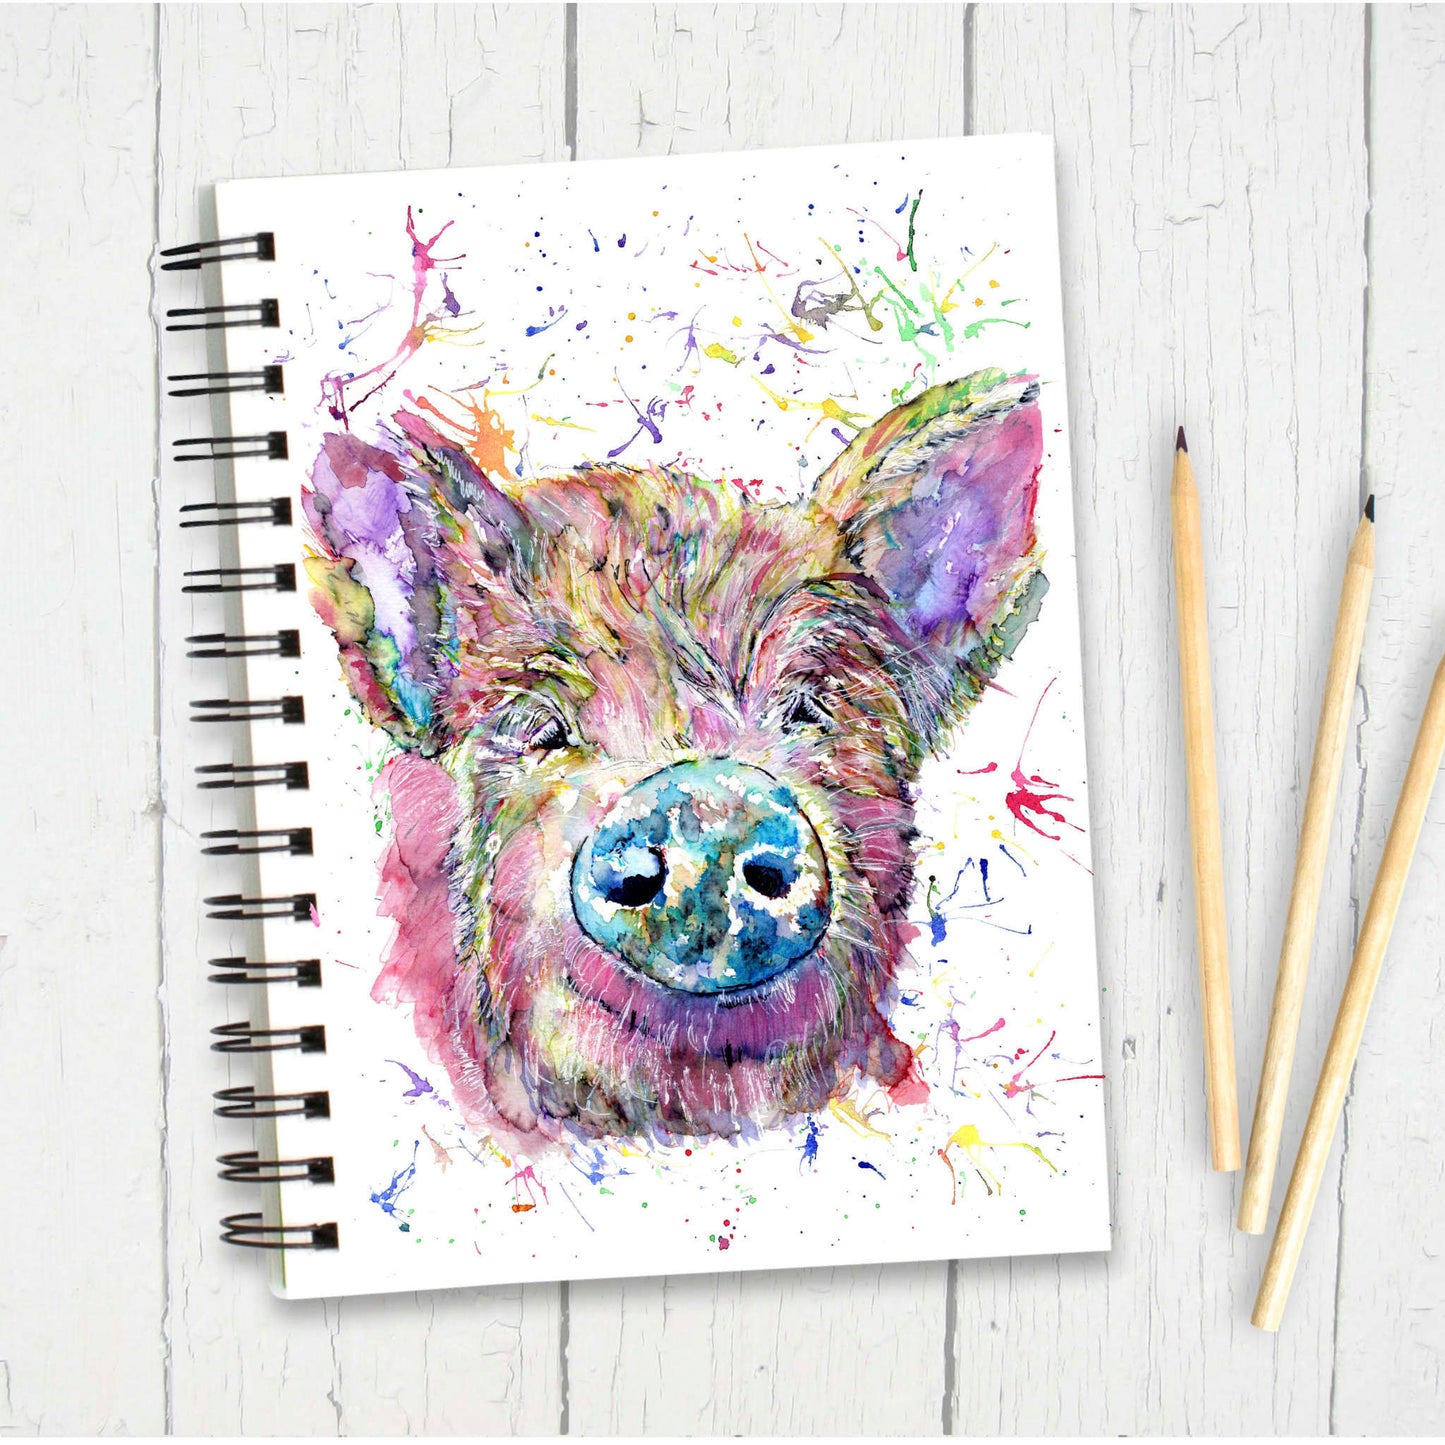 Pig Notebook | Pig Themed Gift